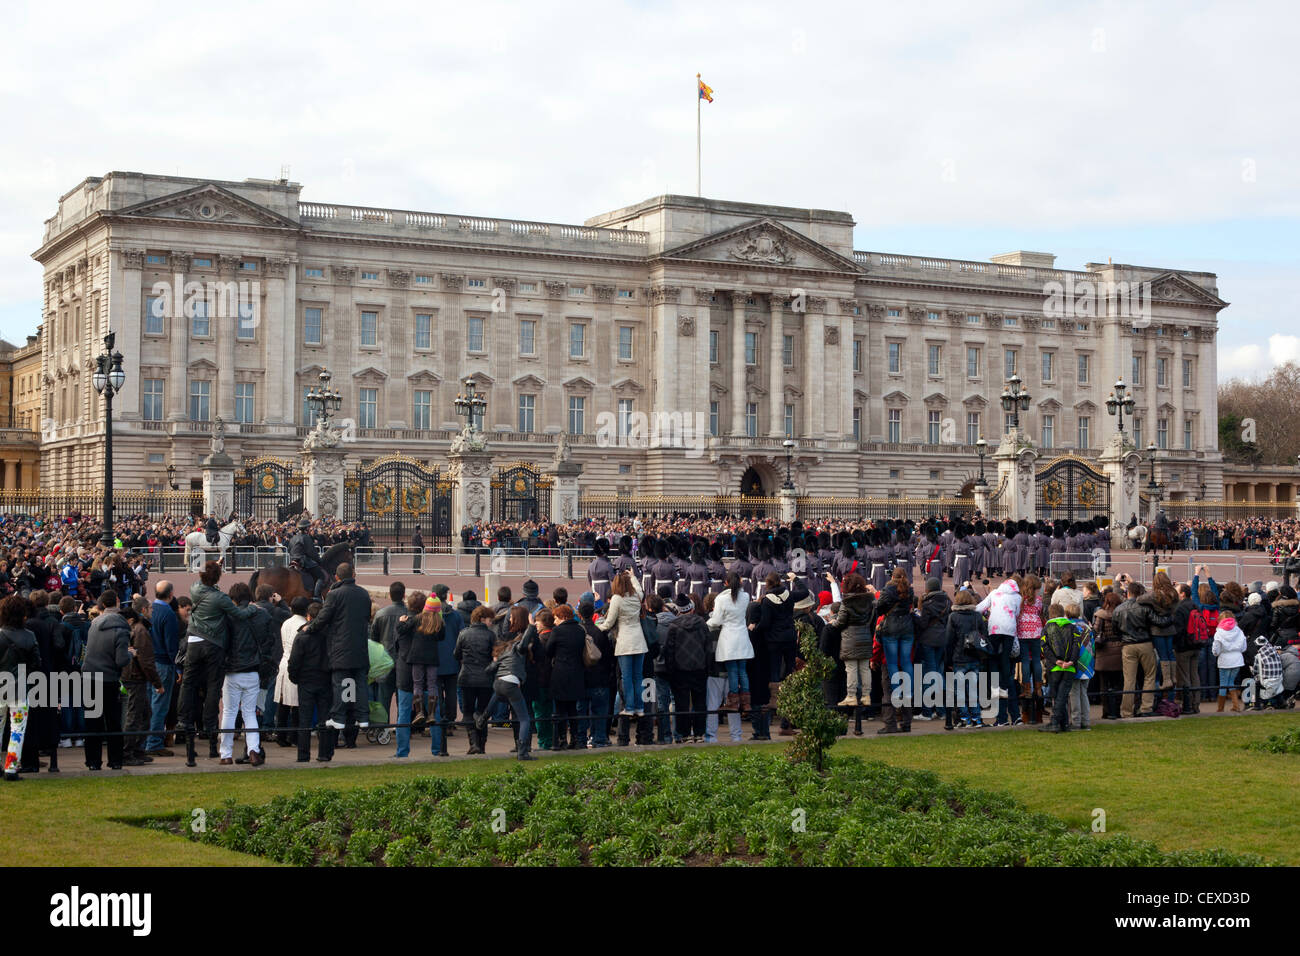 Crowds outside Buckingham Palace to see the Changing of the Guard. Stock Photo